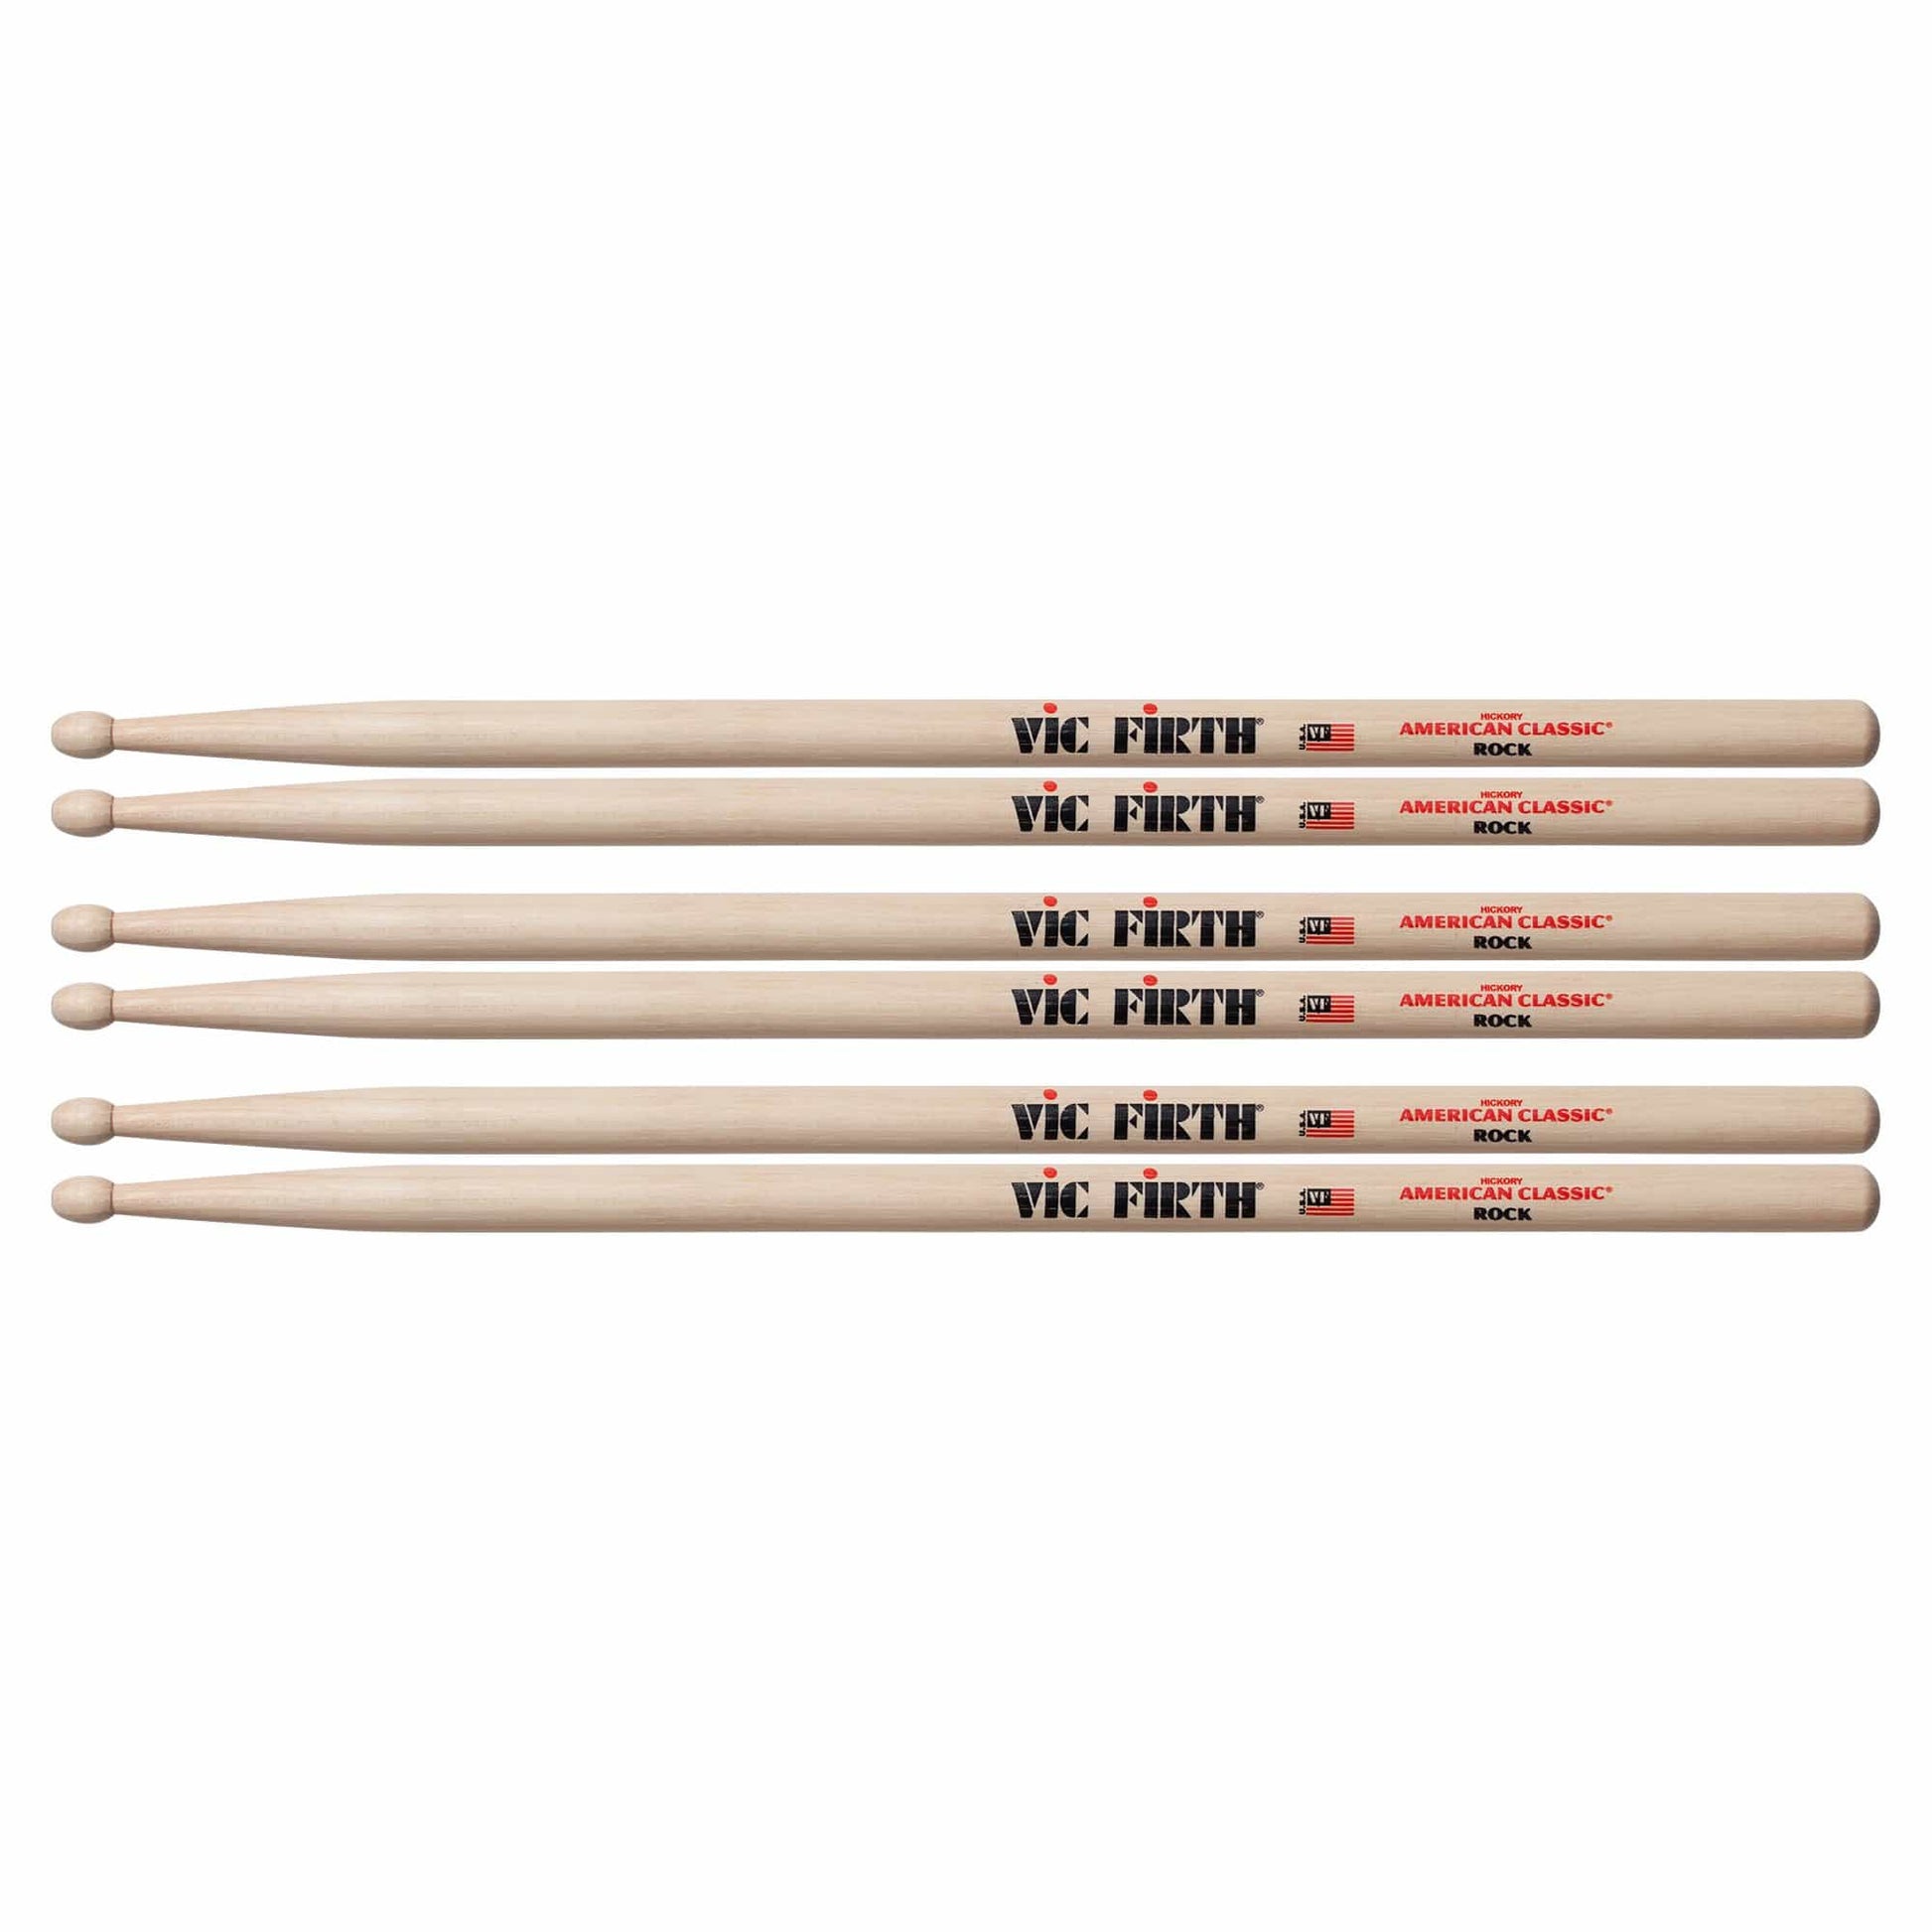 Vic Firth American Classic Rock Wood Tip Drum Sticks (3 Pair Bundle) Drums and Percussion / Parts and Accessories / Drum Sticks and Mallets